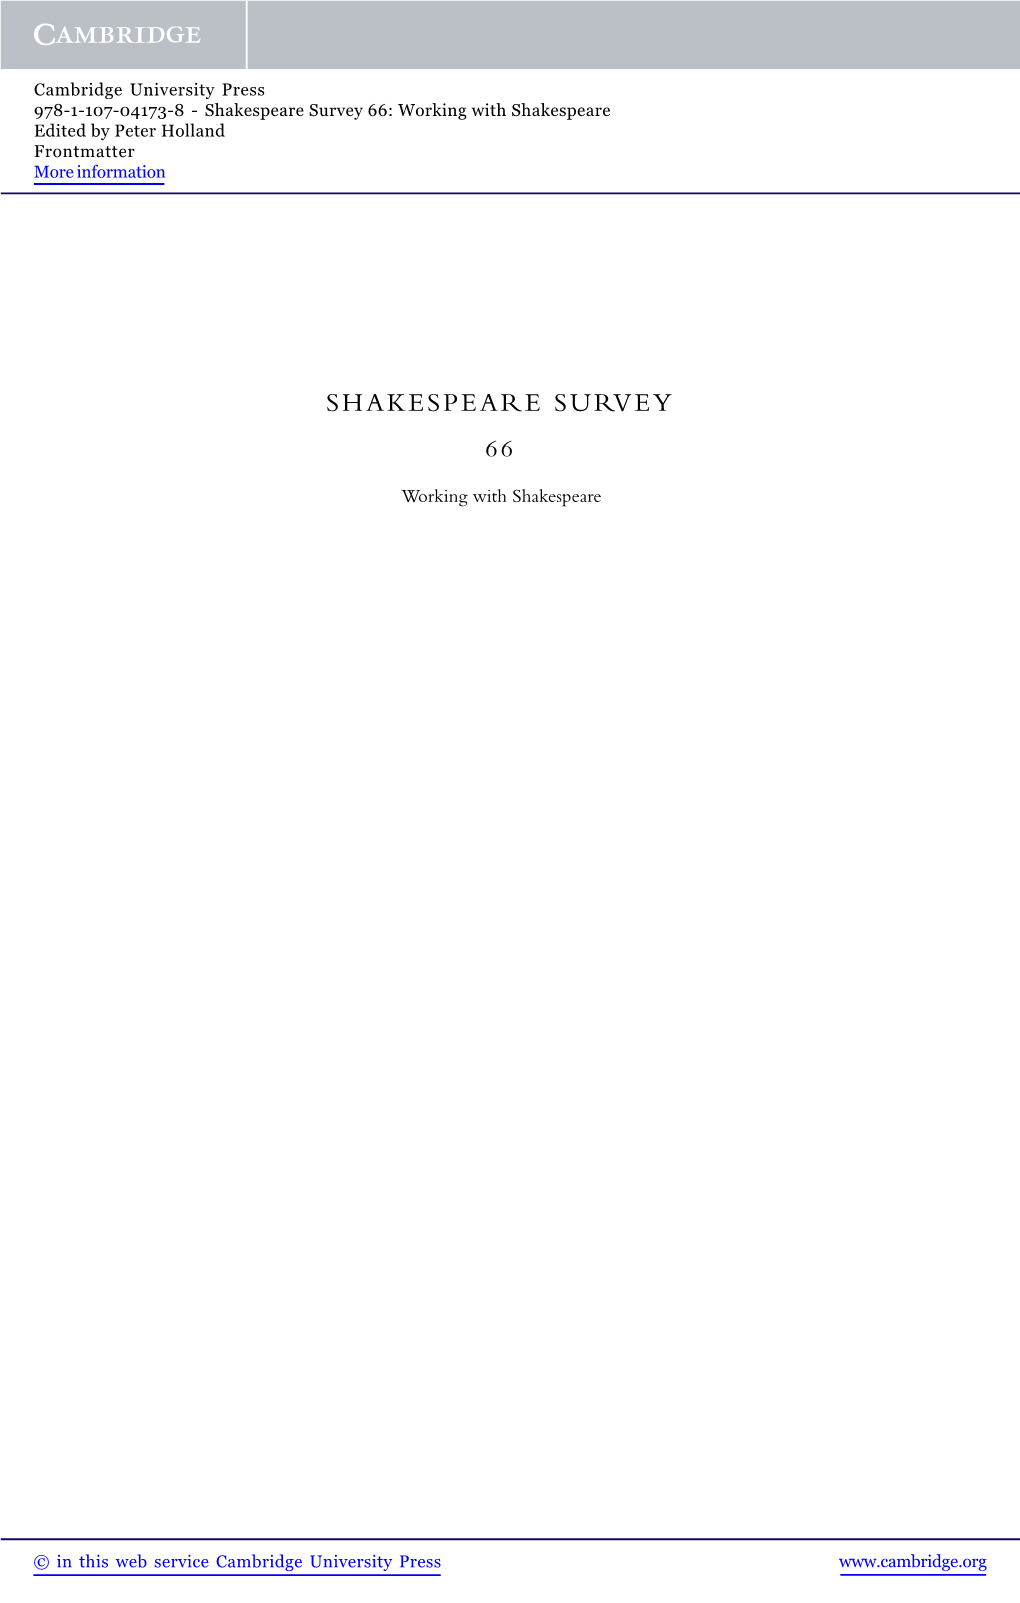 Shakespeare Survey 66: Working with Shakespeare Edited by Peter Holland Frontmatter More Information